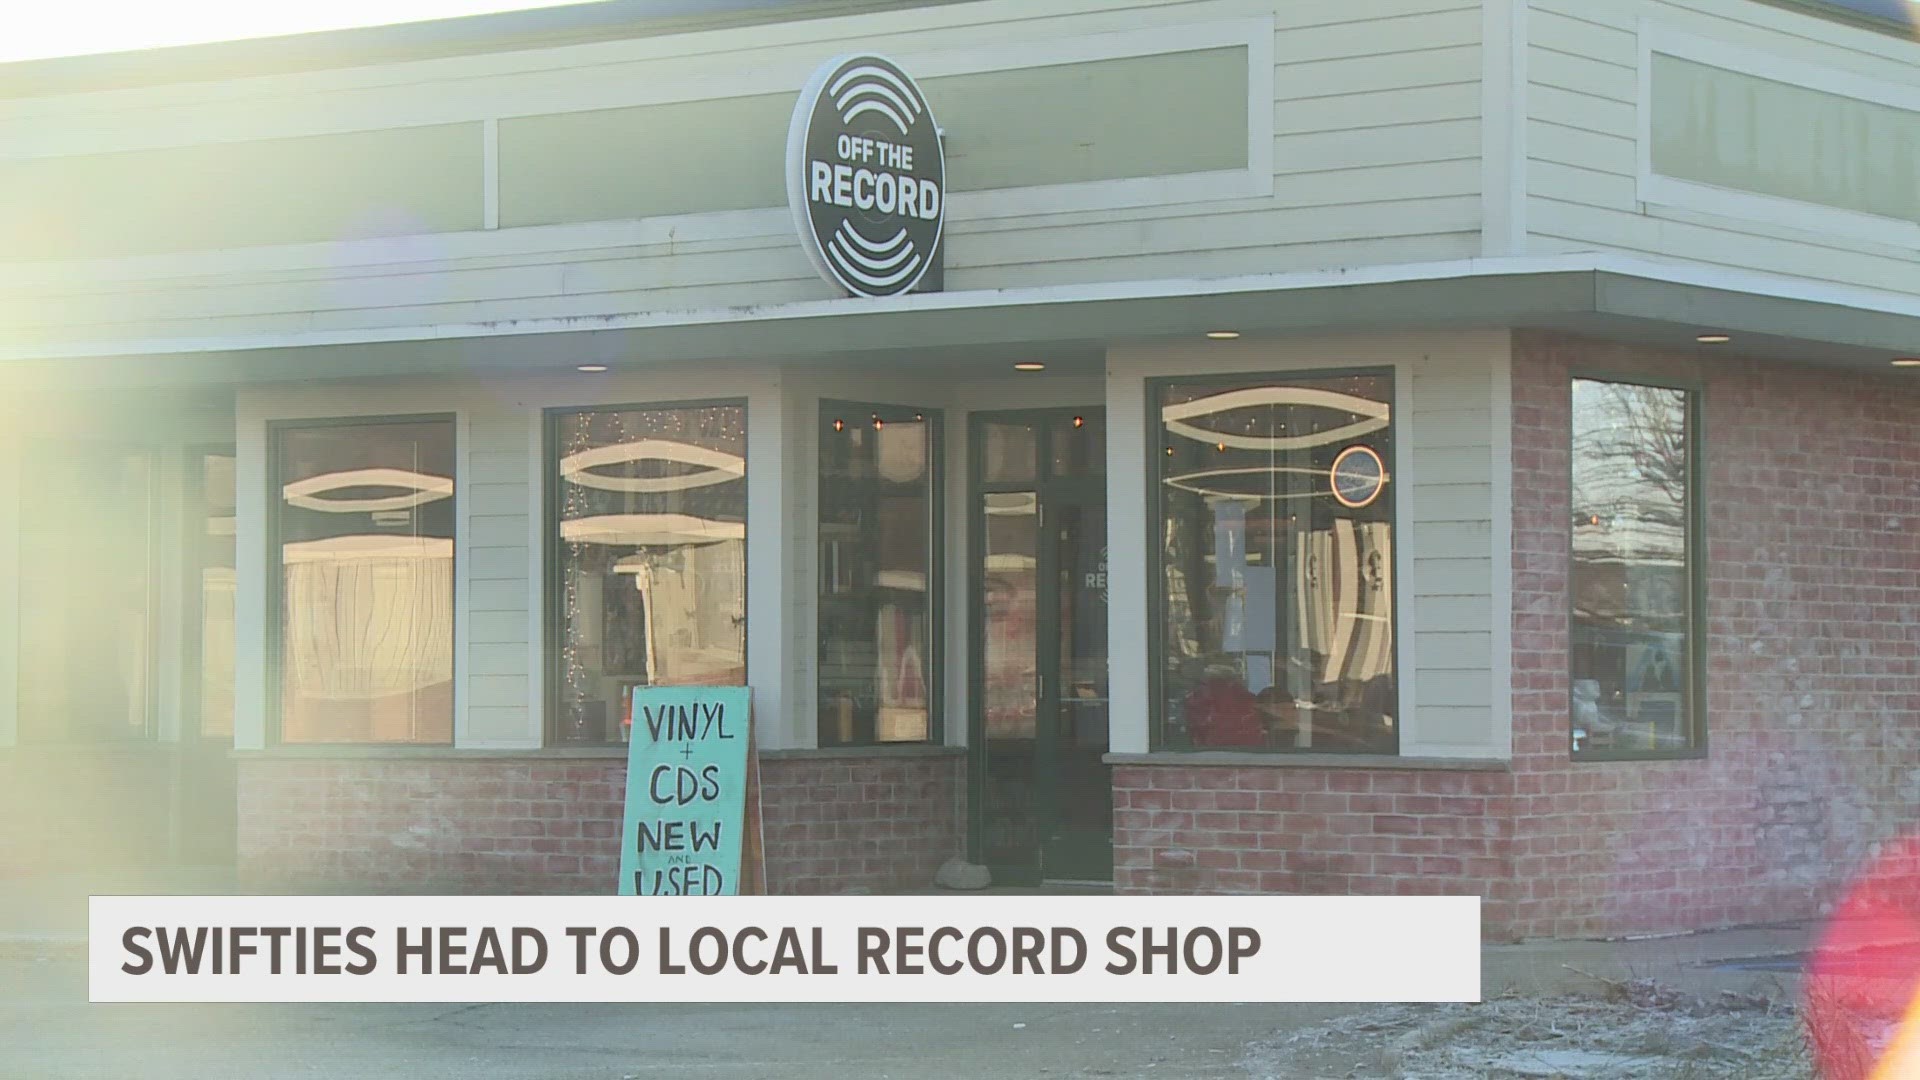 The record store is also preparing for Record Store Day on Saturday, April 20.